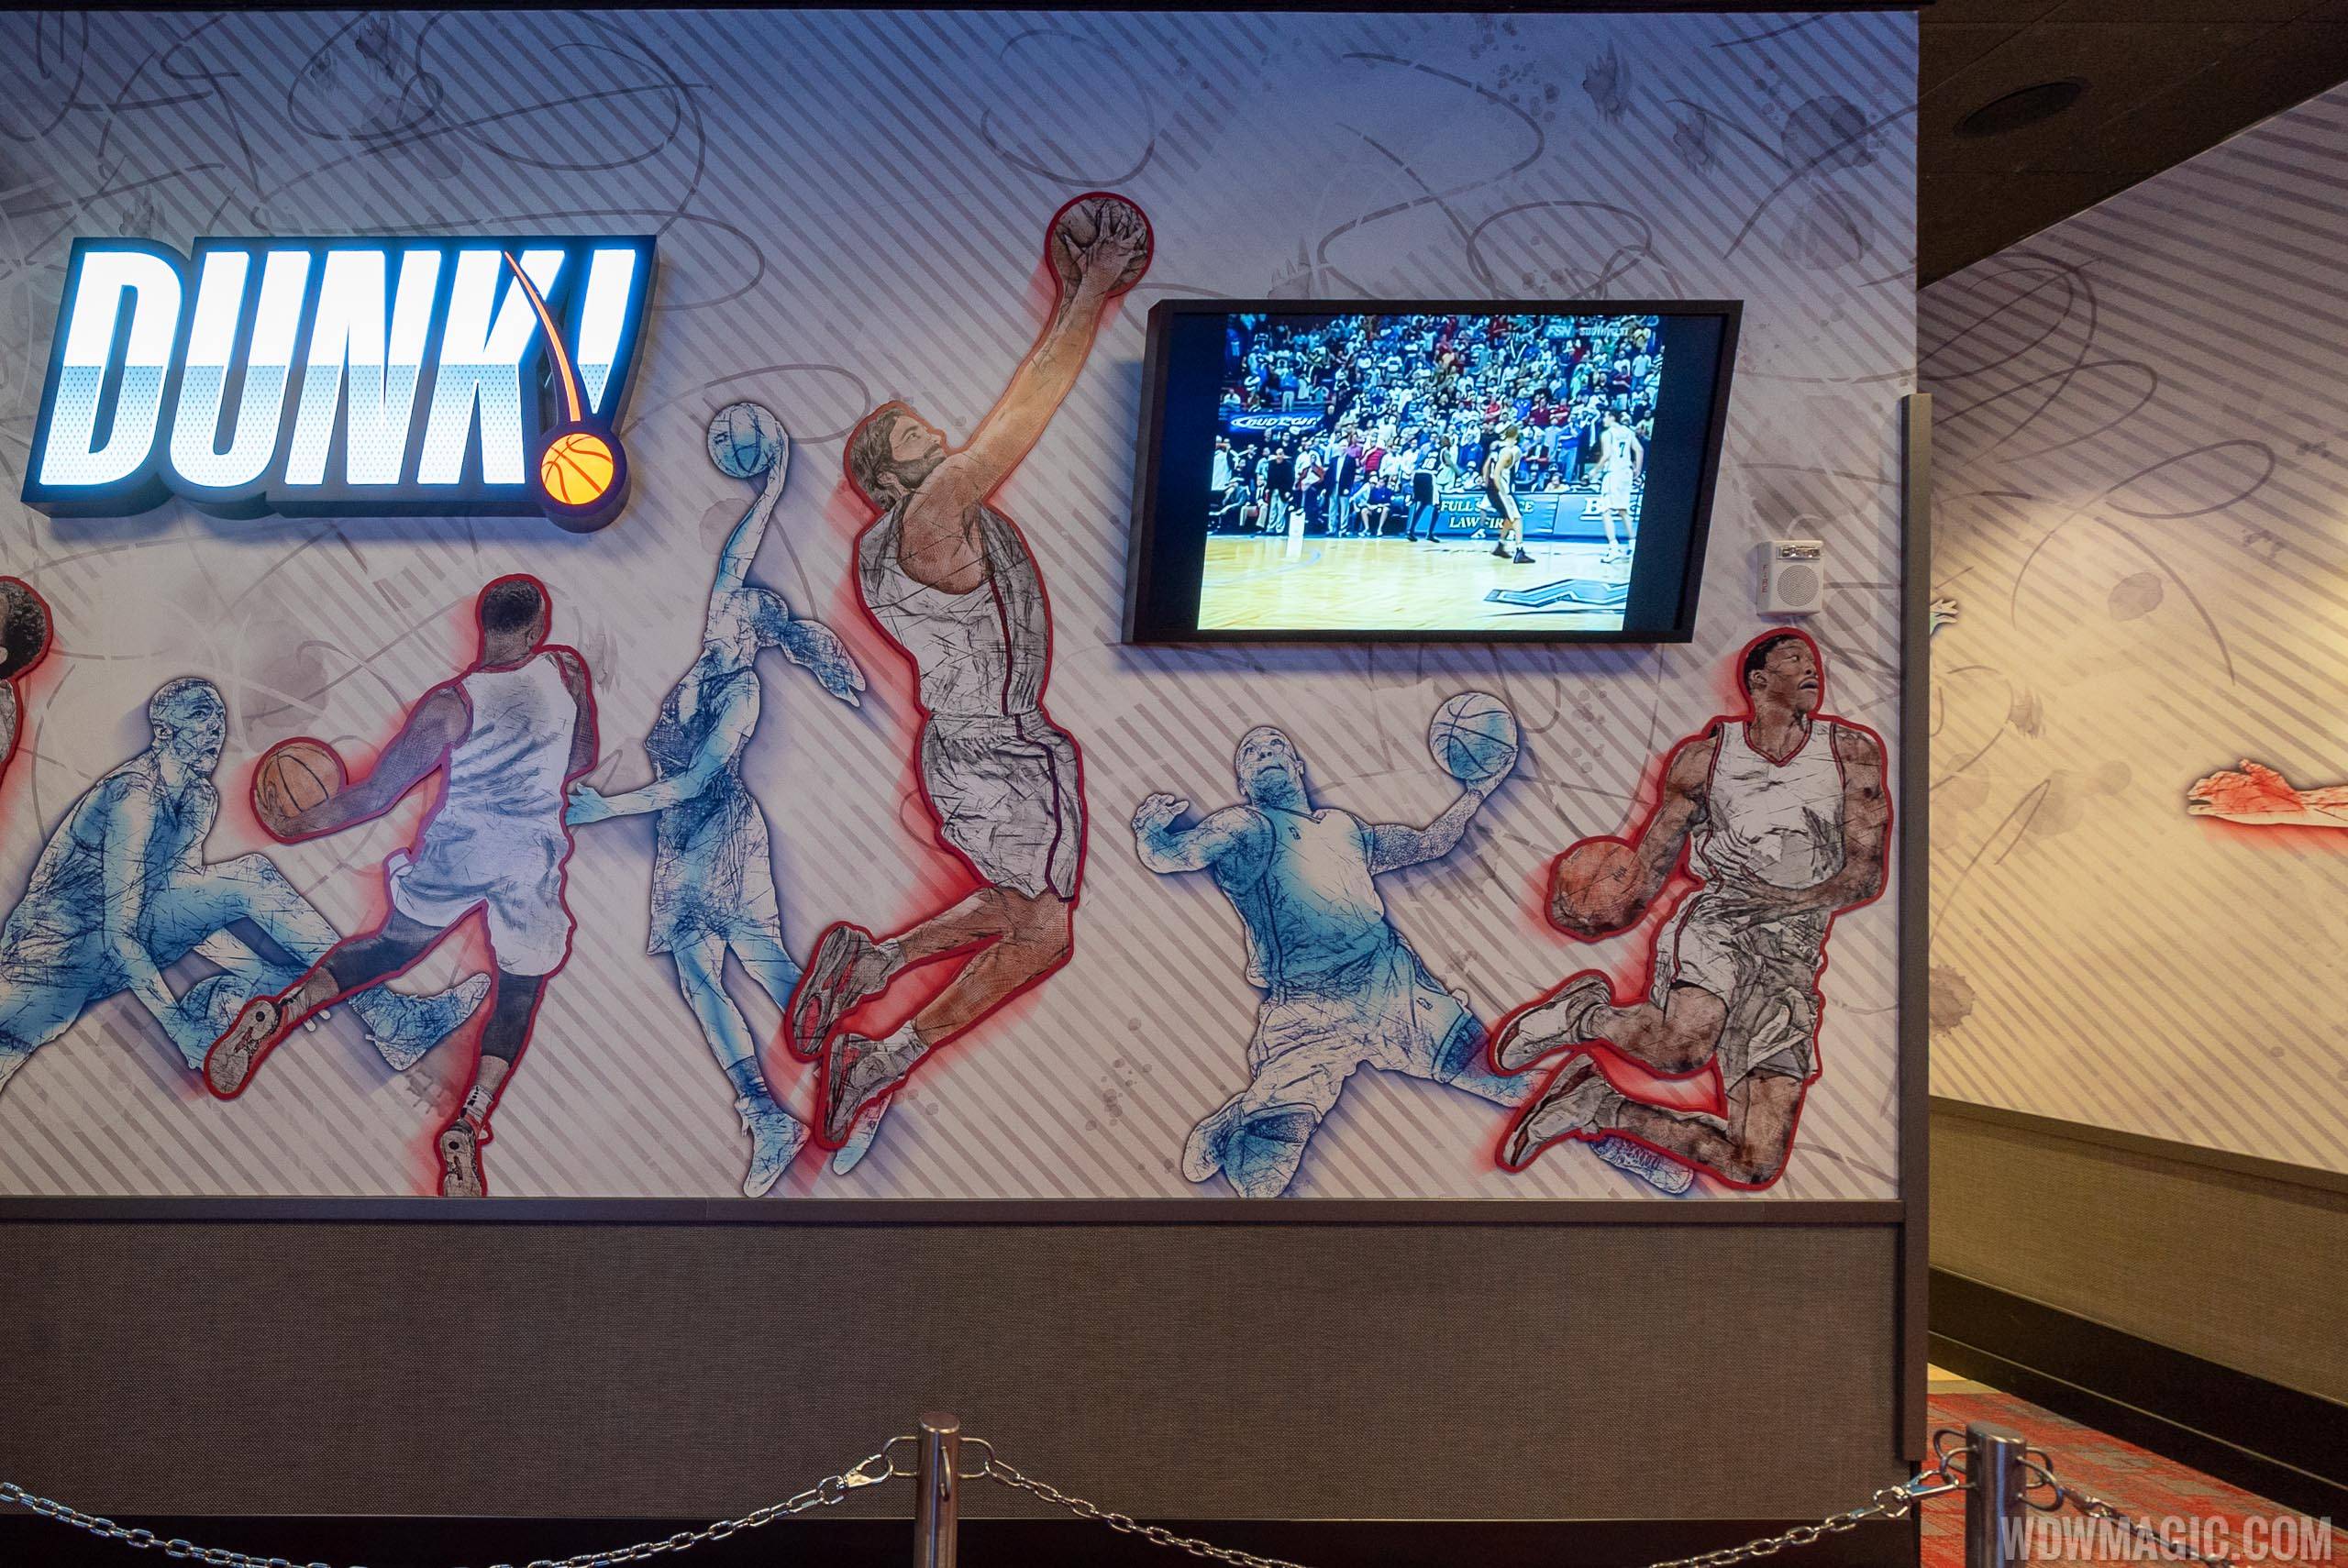 Tour of The NBA Experience at Disney Springs